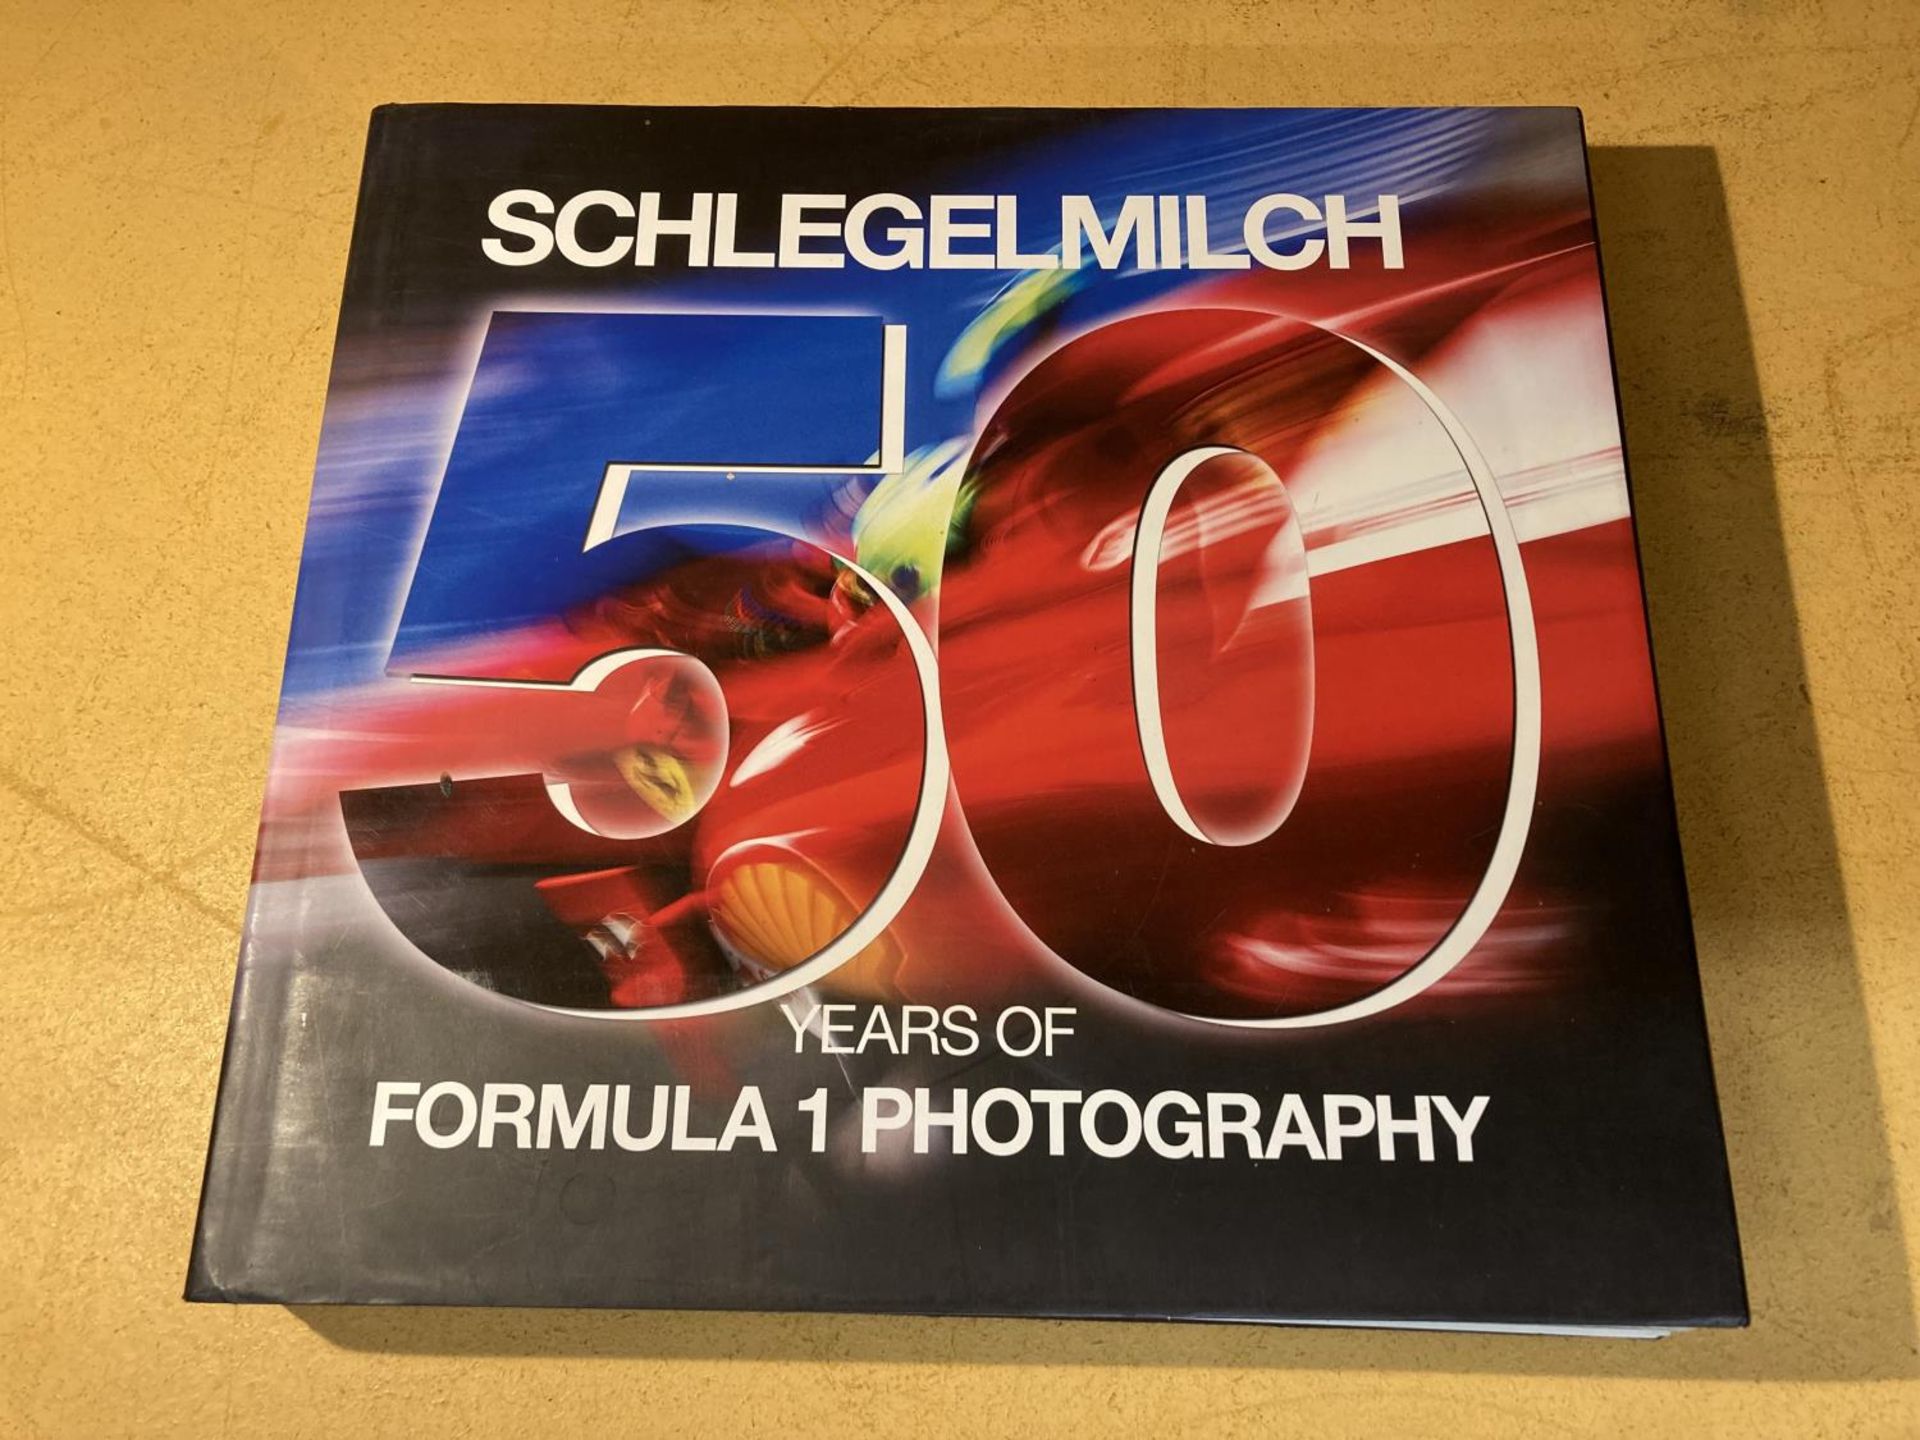 SCHLEGELMILCH 50 YEARS OF FORMULA 1 PHOTOGRAPHY (SPANISH AND ENGLISH EDITION) - 2012 FOLIO SIZED,